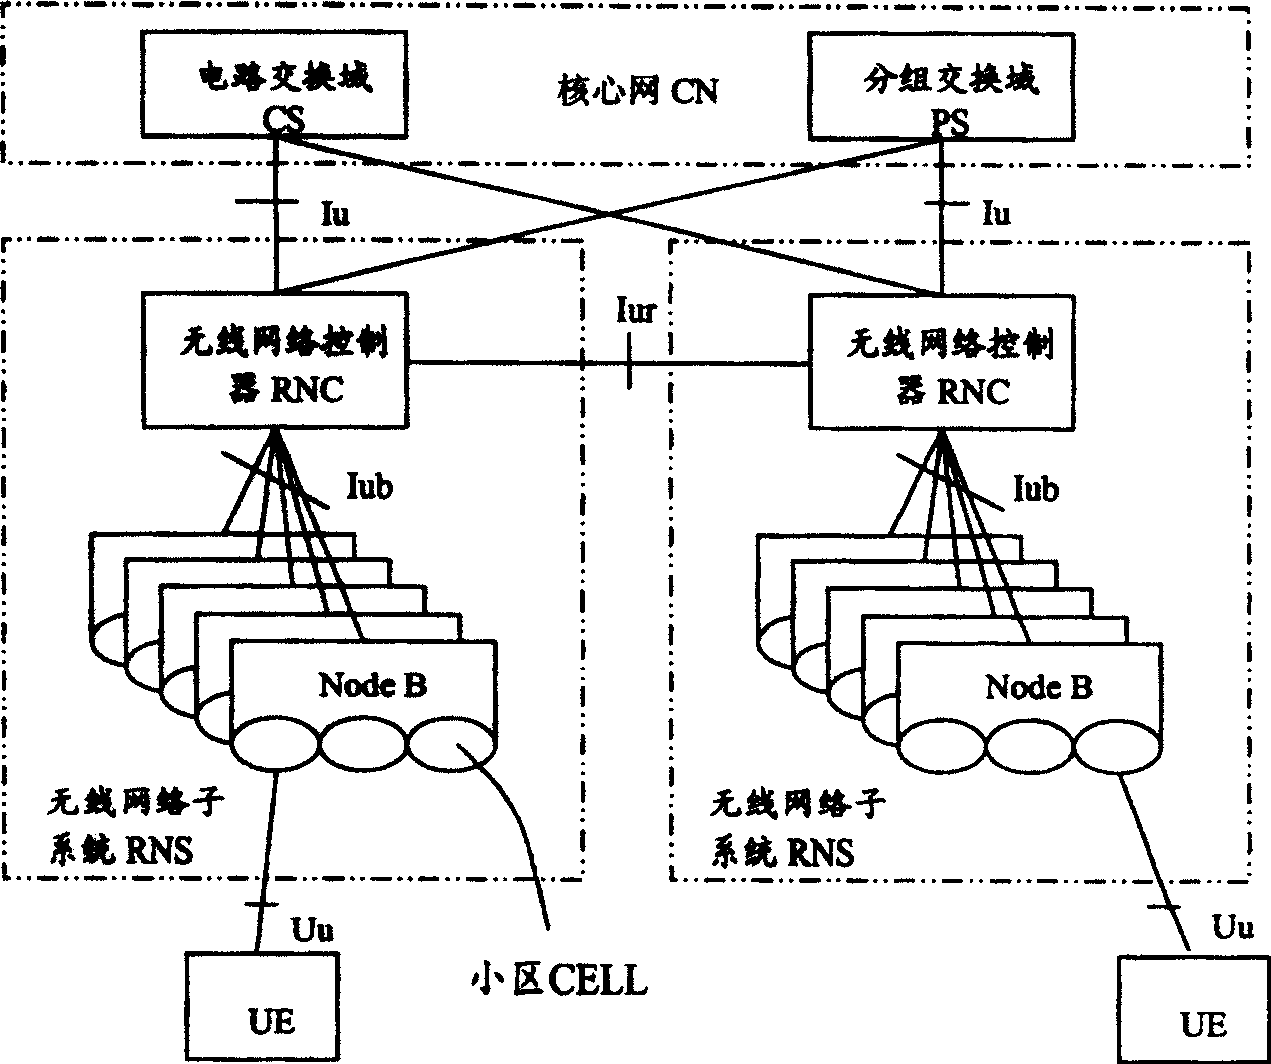 Distributing method for VOIP service band width